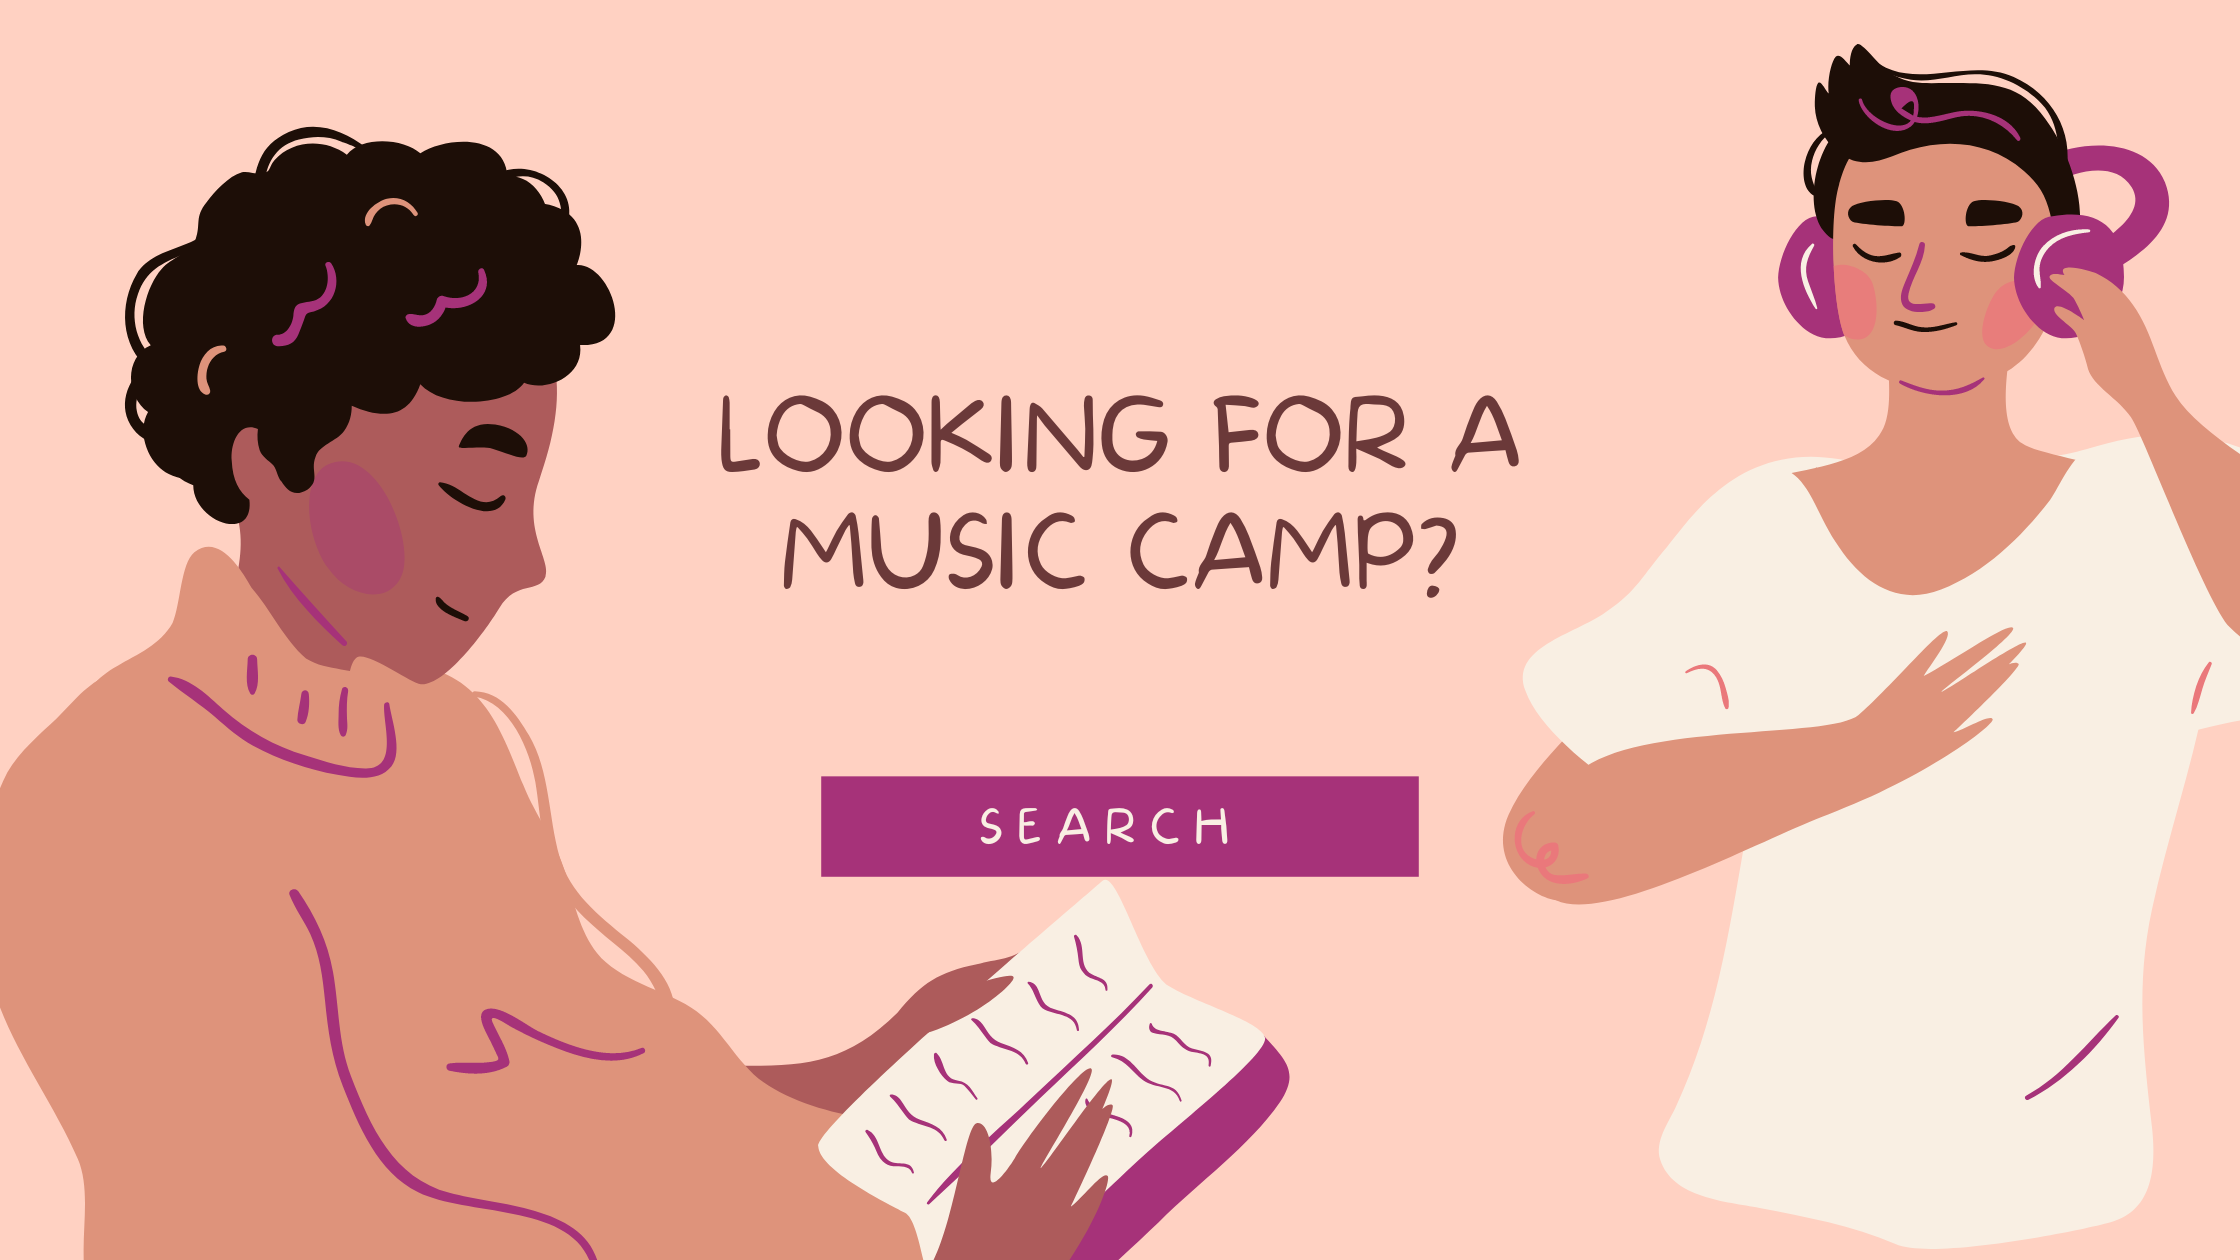 Looking for a music camp